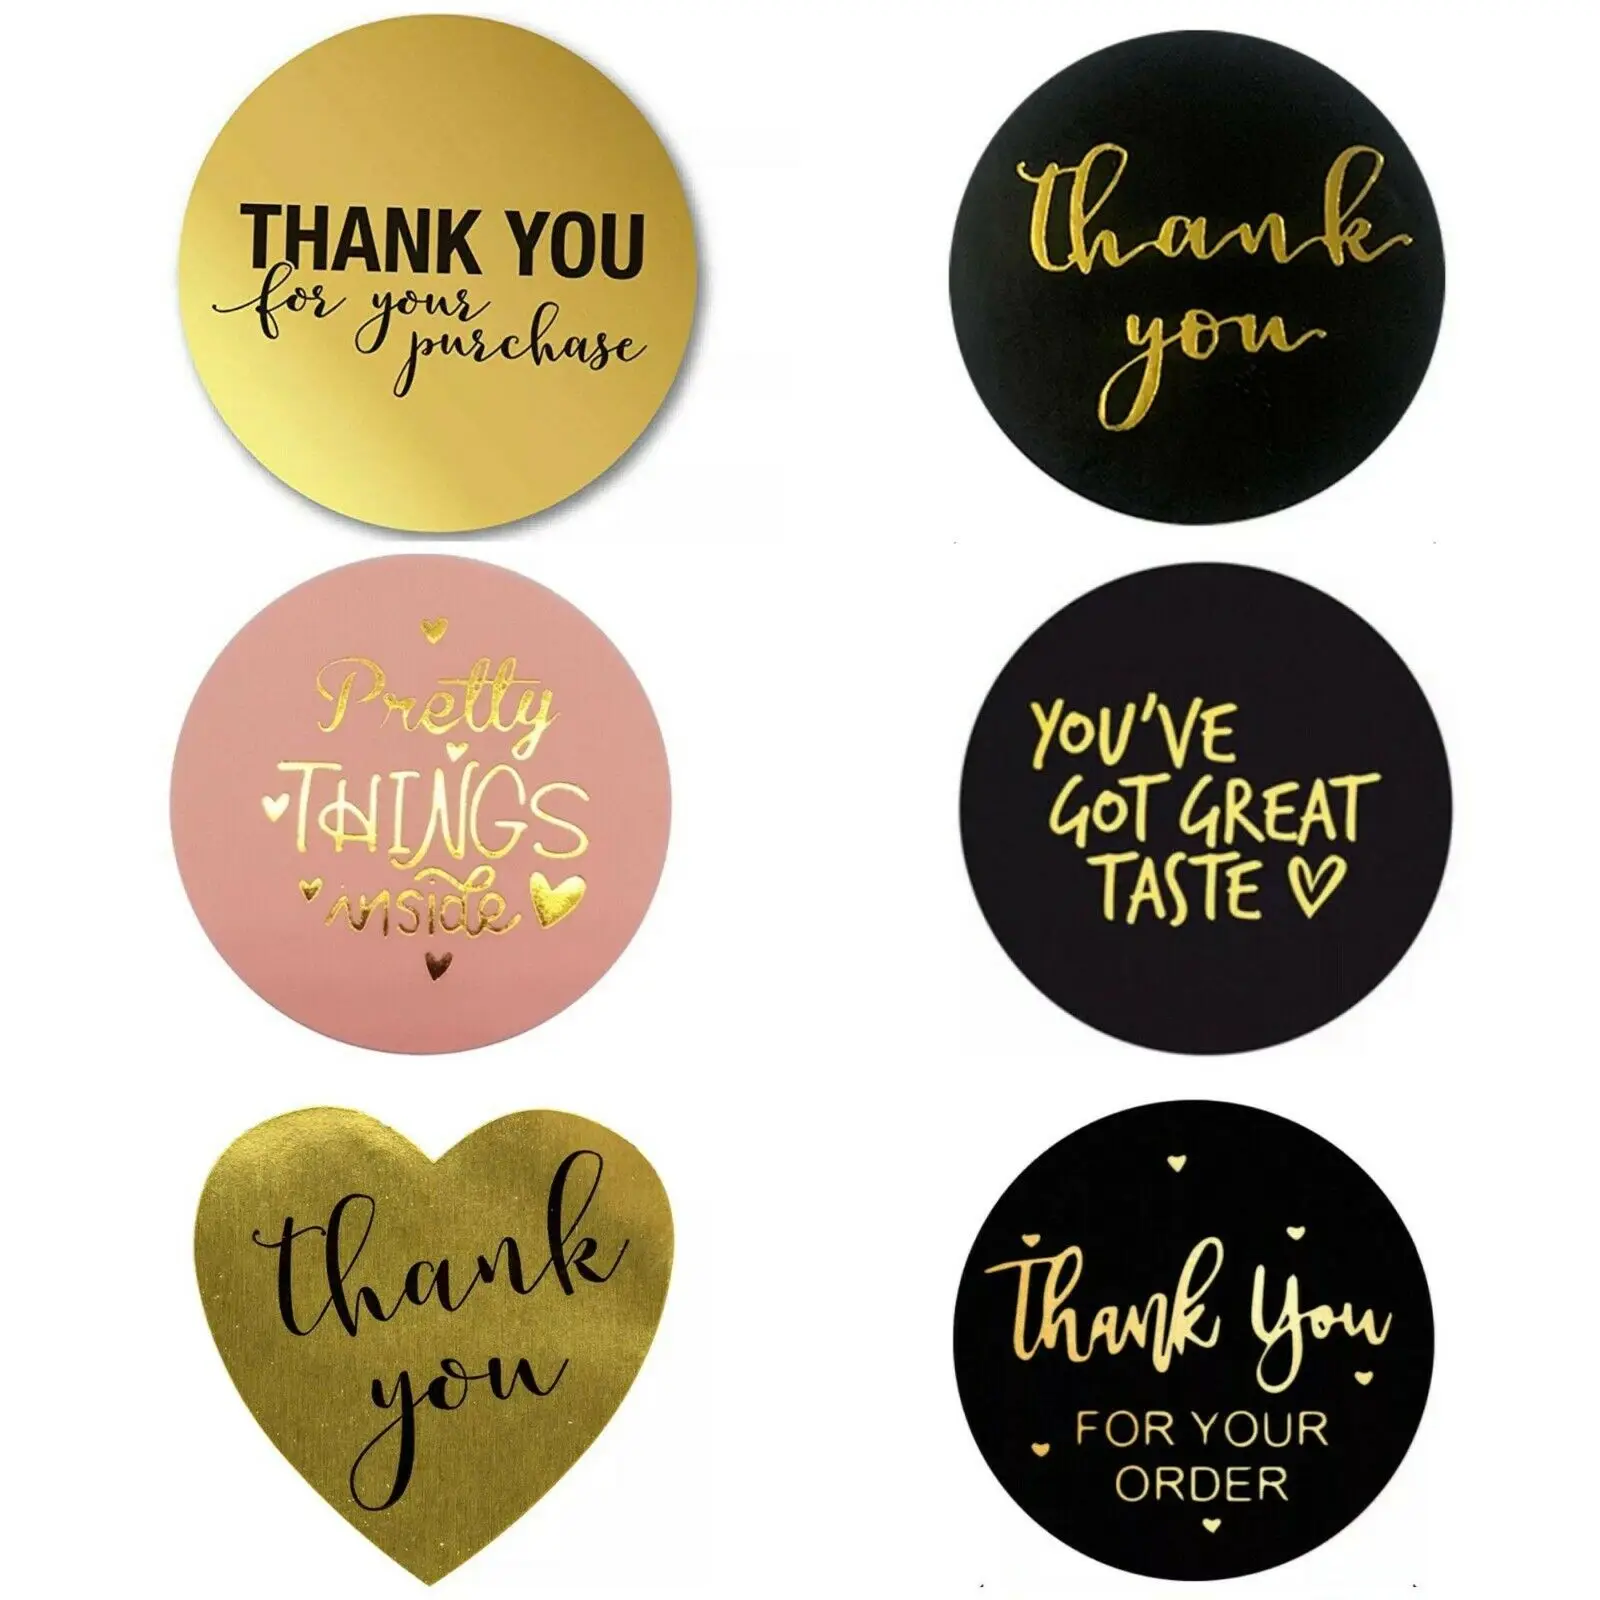 500* Thank You Stickers You've Got Great Taste Round Heart Handmade Label Sealed 